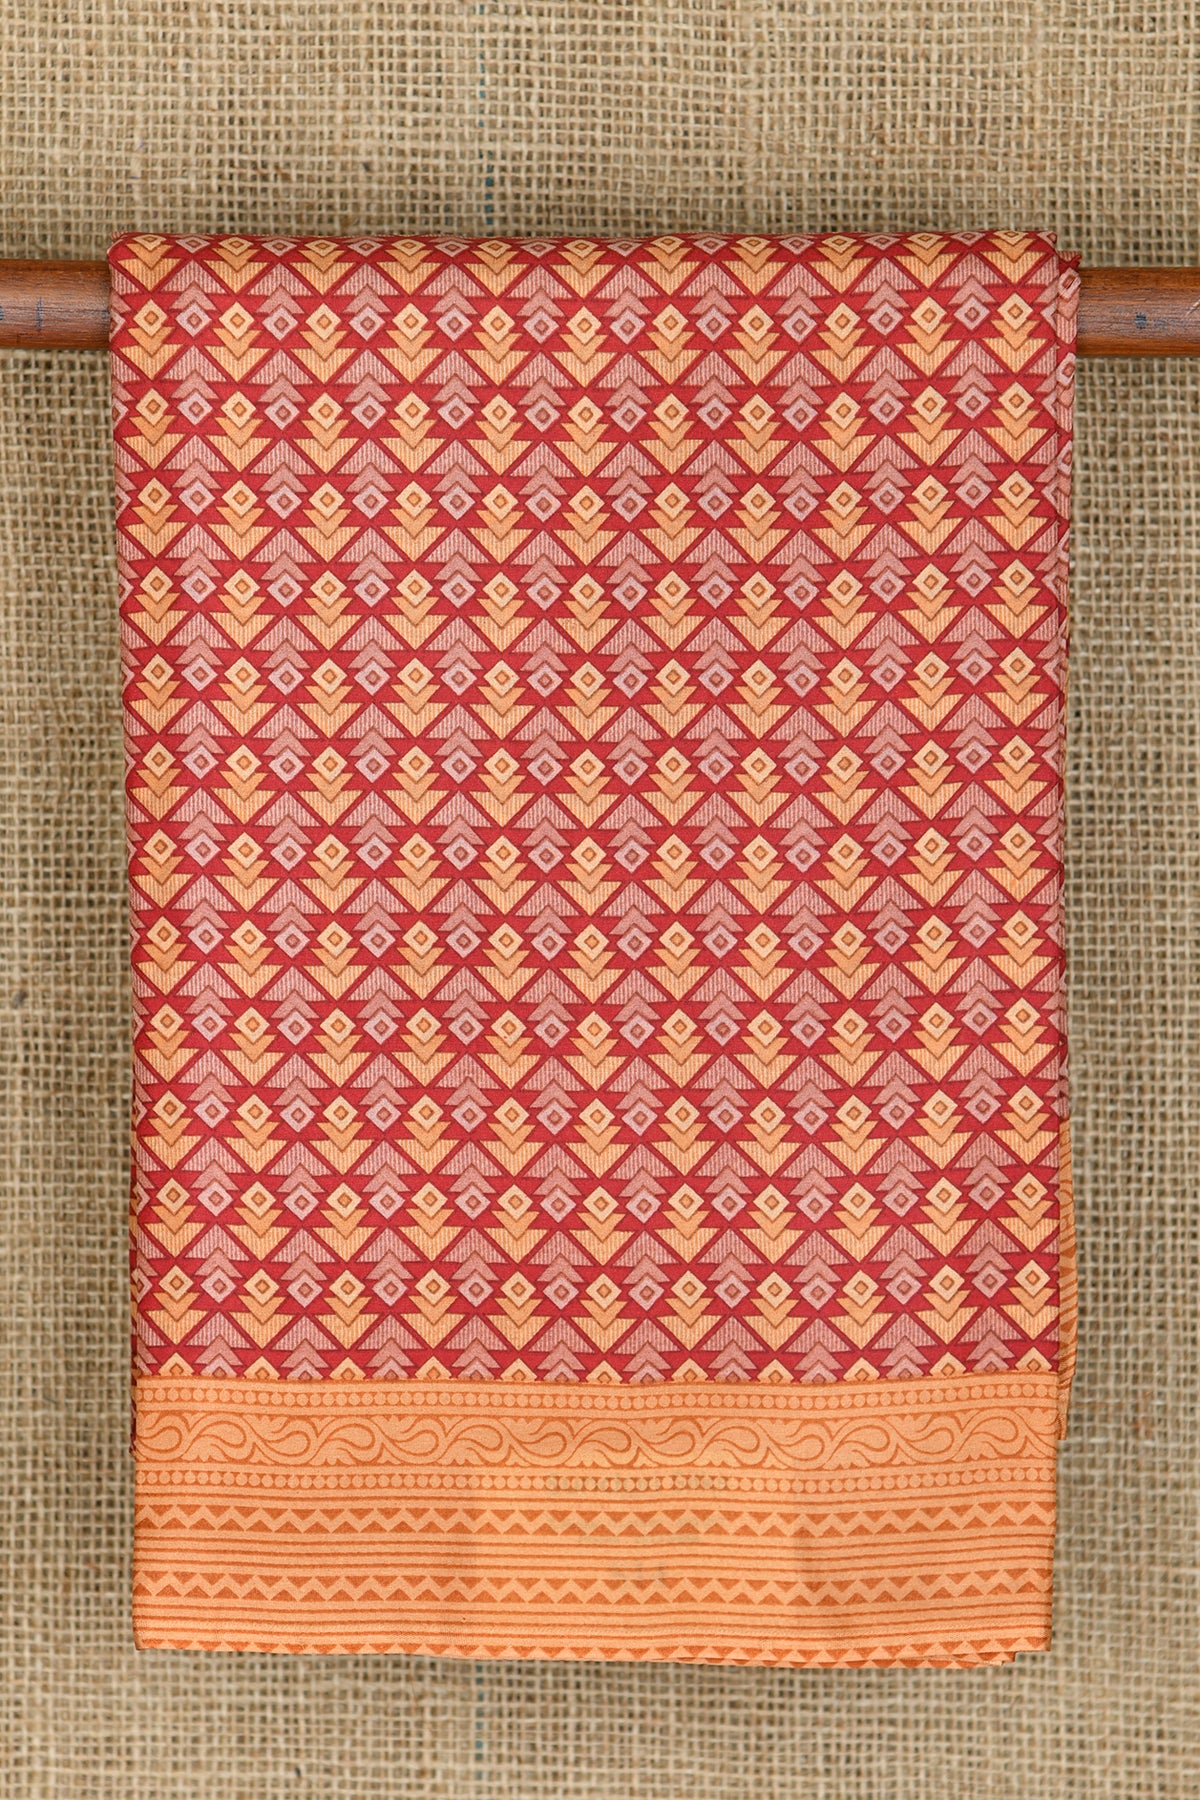 Allover Design Biscuit Brown And Maroon Printed Silk Saree